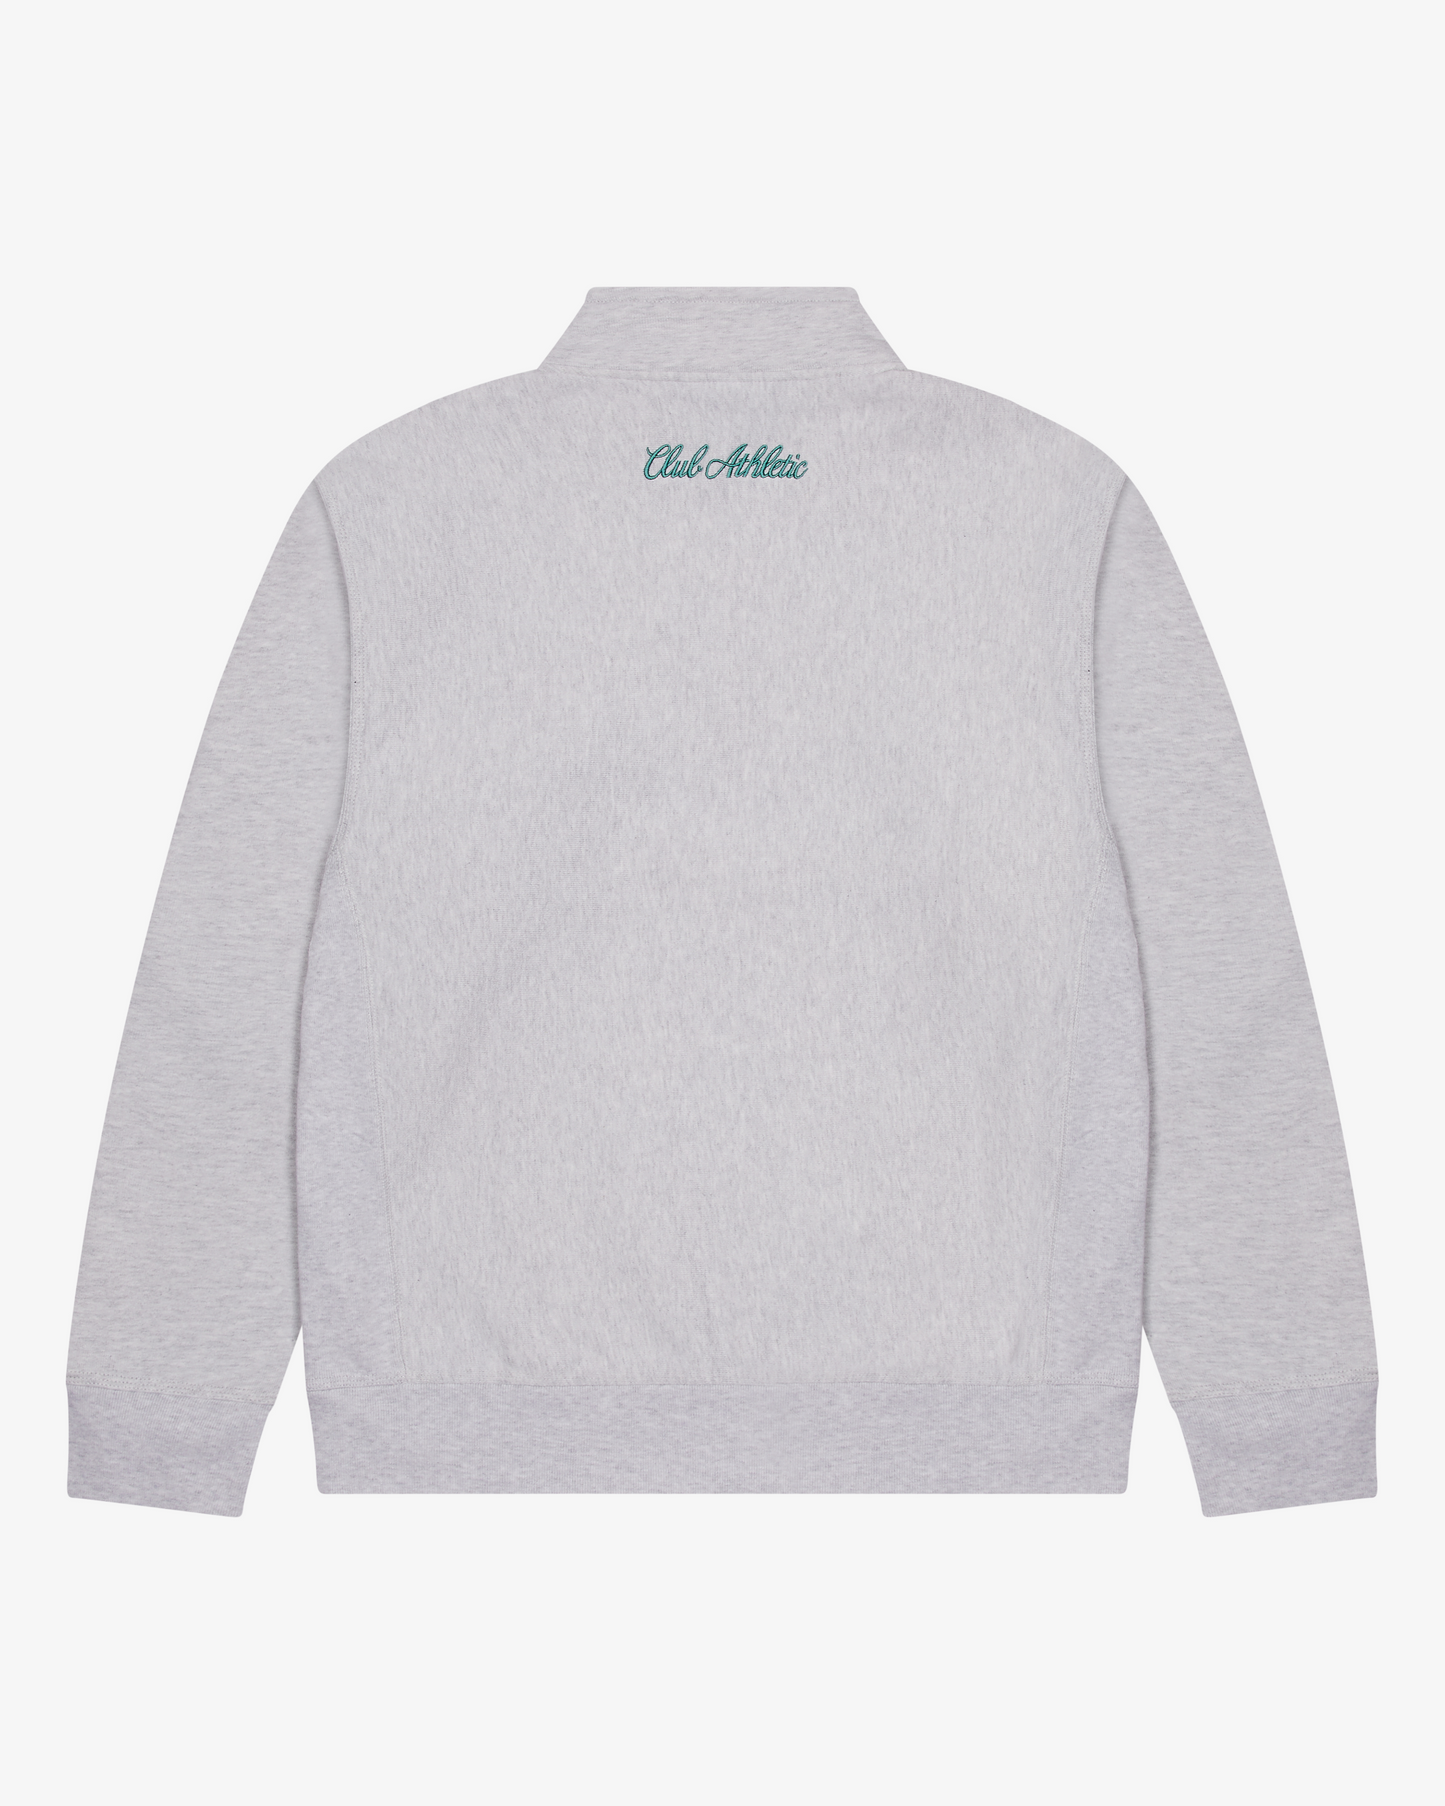 CLUB ATHLETIC GREY MARL EMBROIDERED QUARTER ZIP